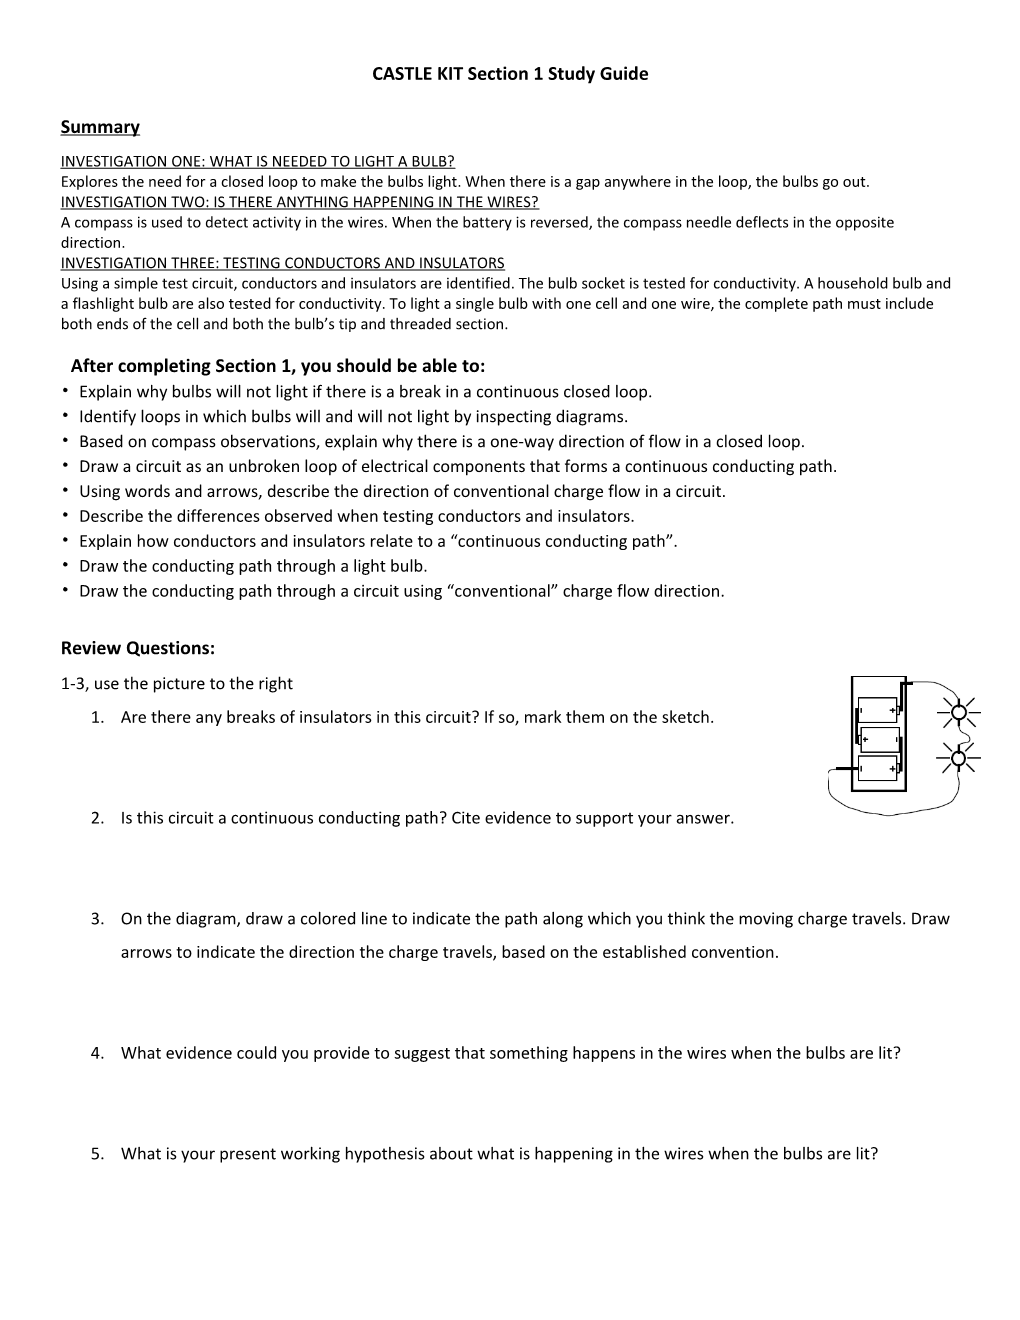 CASTLE KIT Section 1 Study Guide